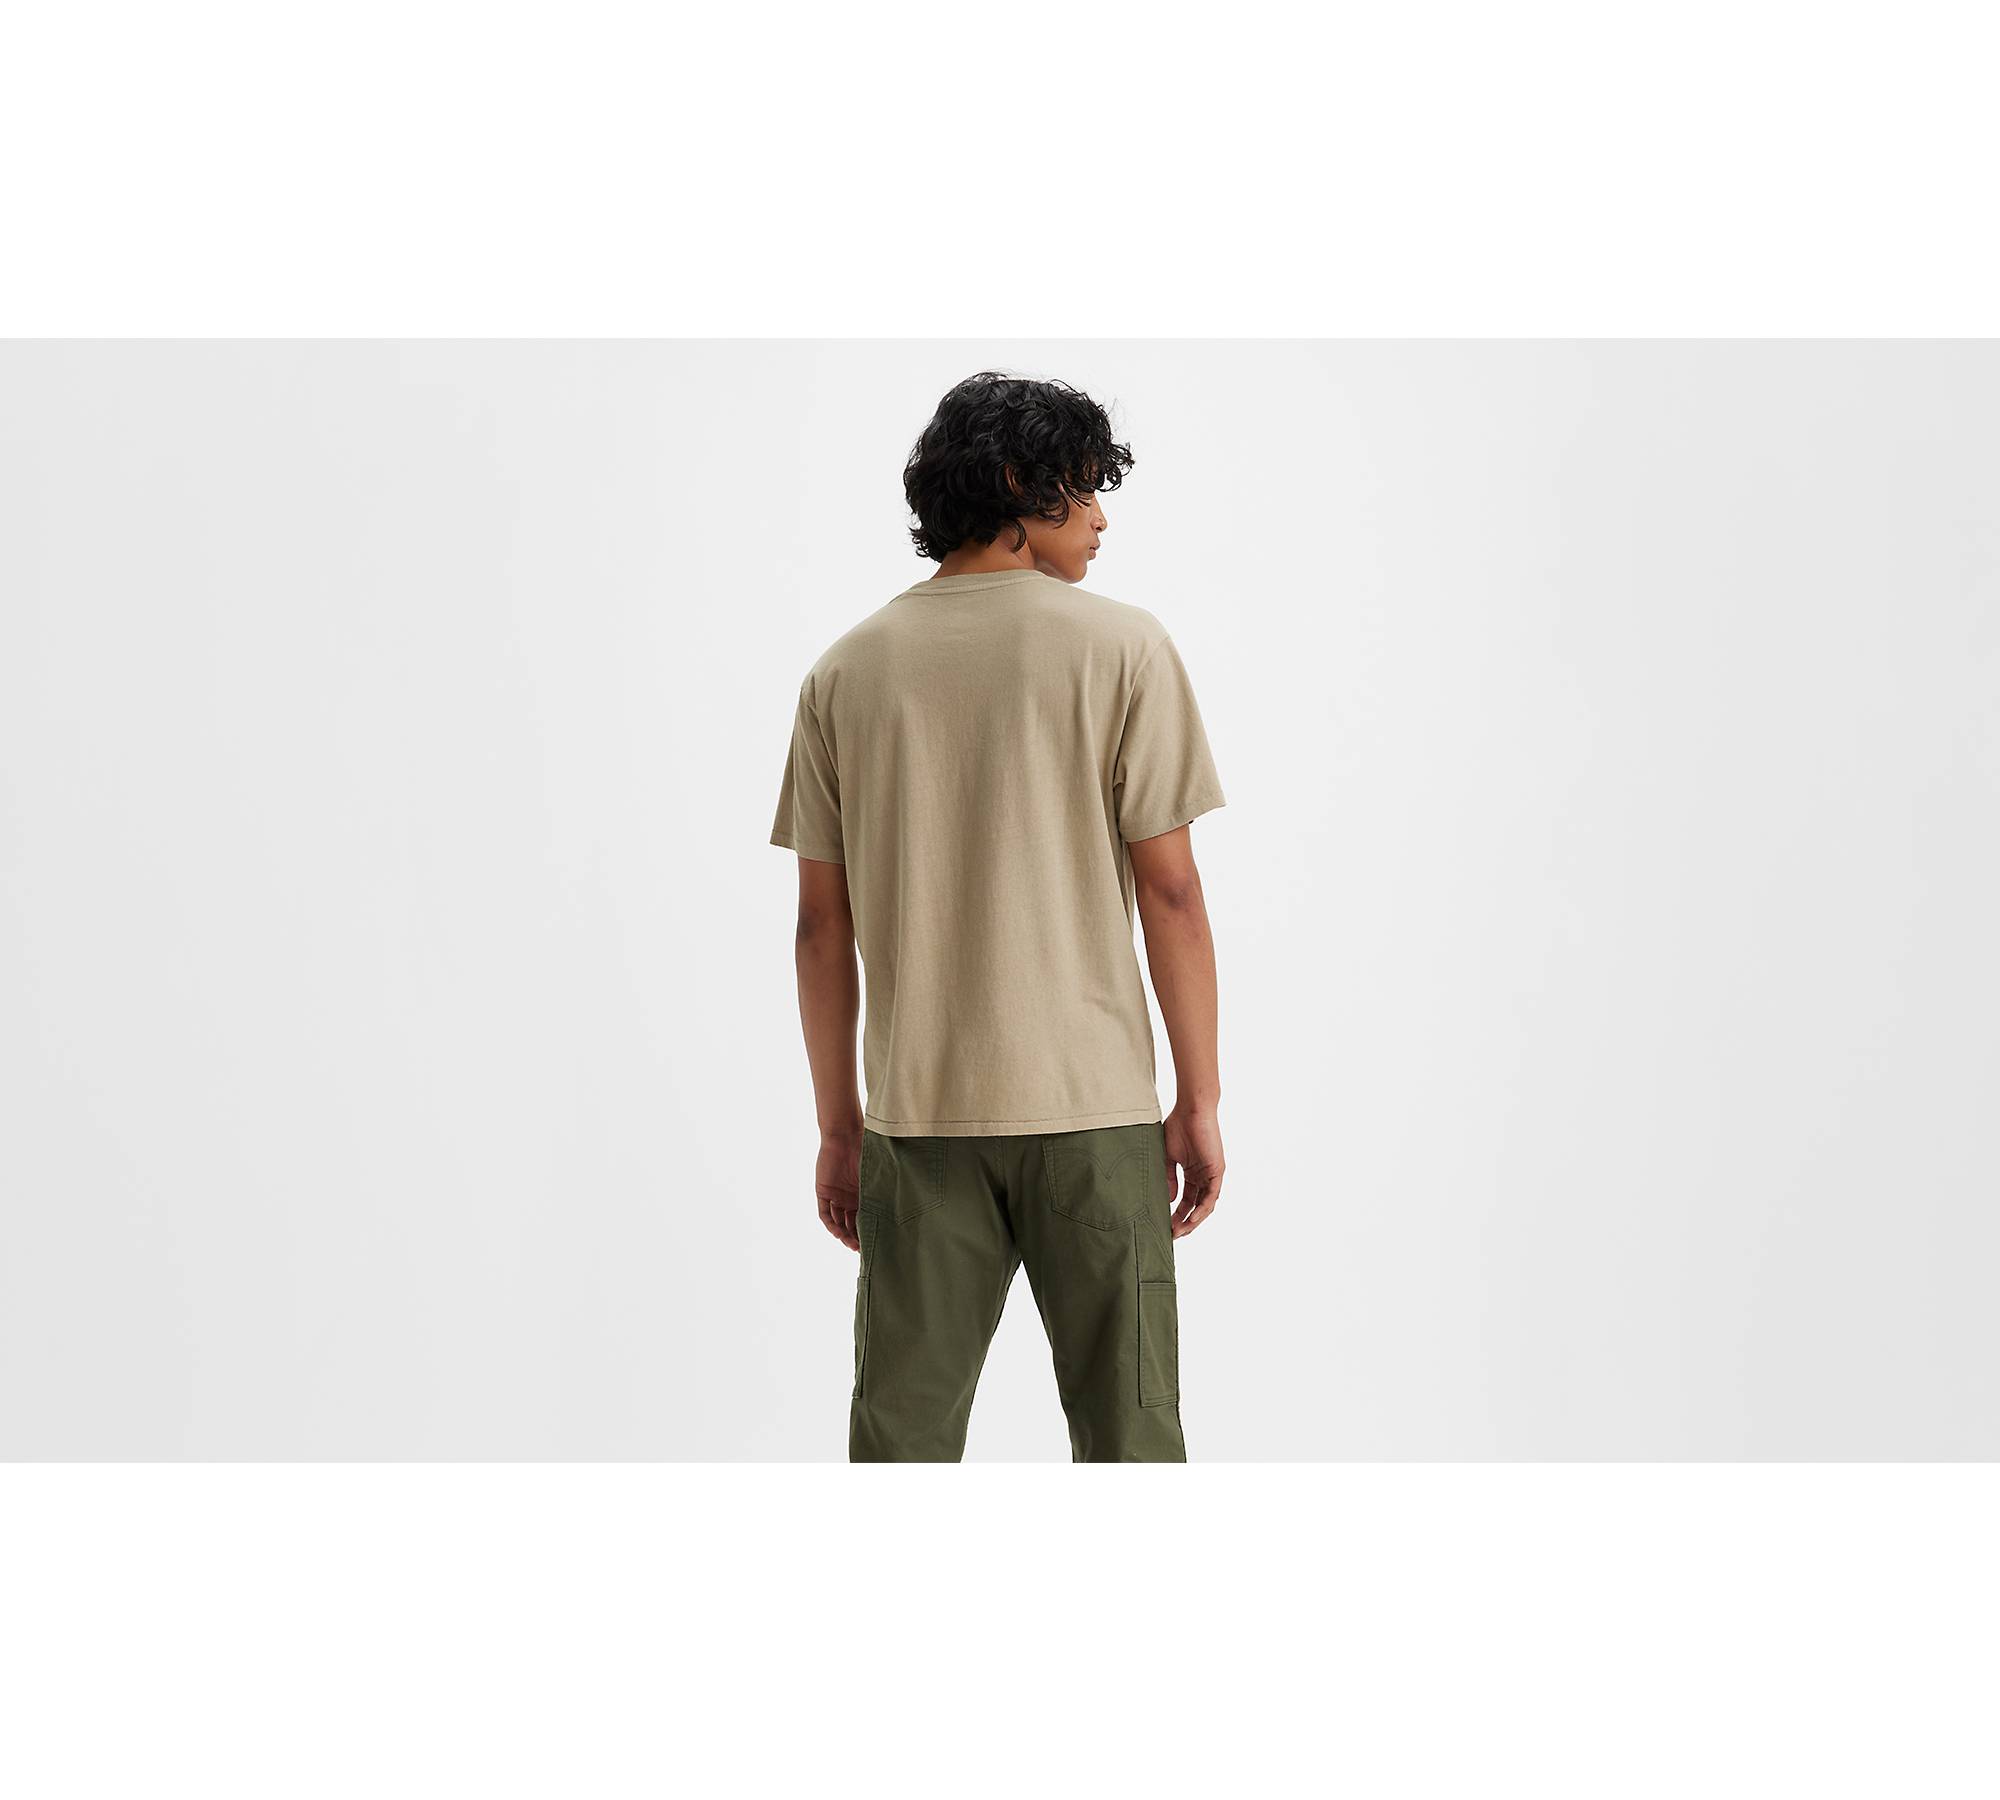 Red Tab™ Vintage T-shirt - Green | Levi's® US